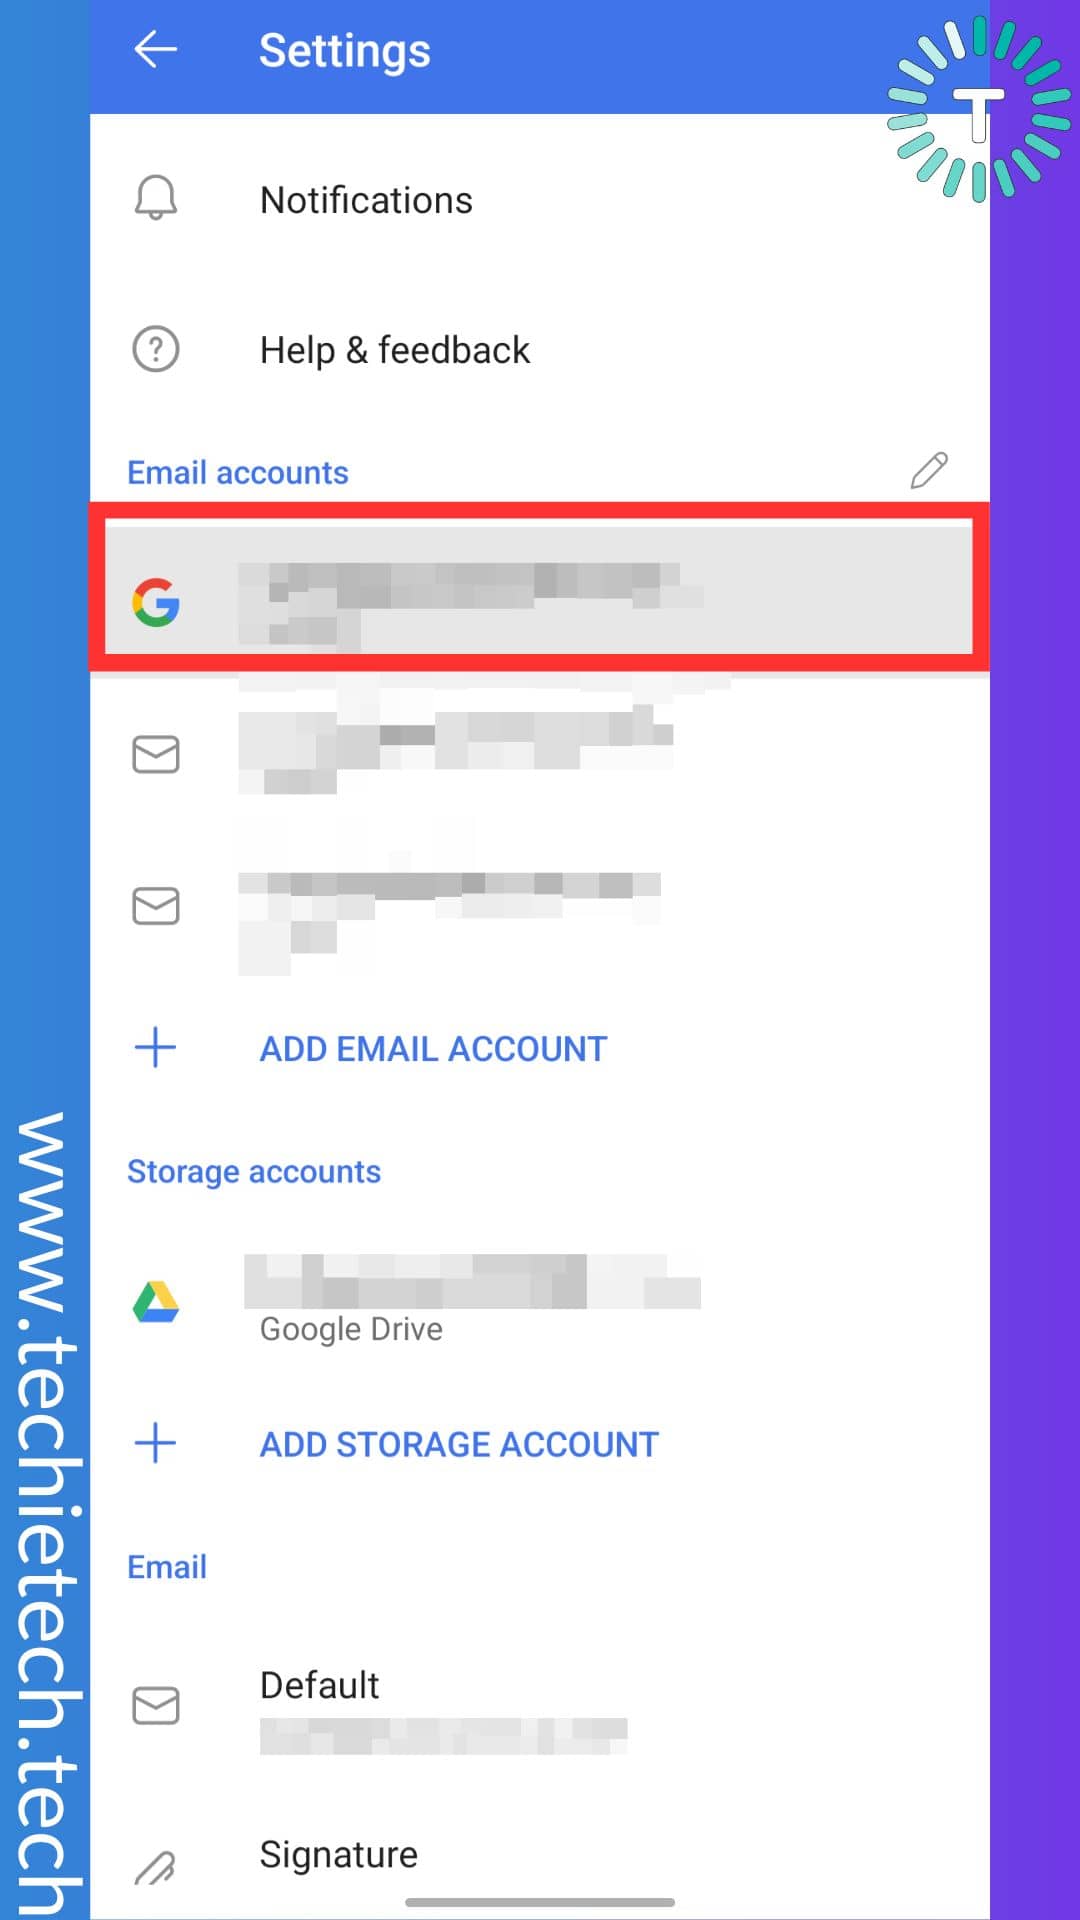 Select an email account